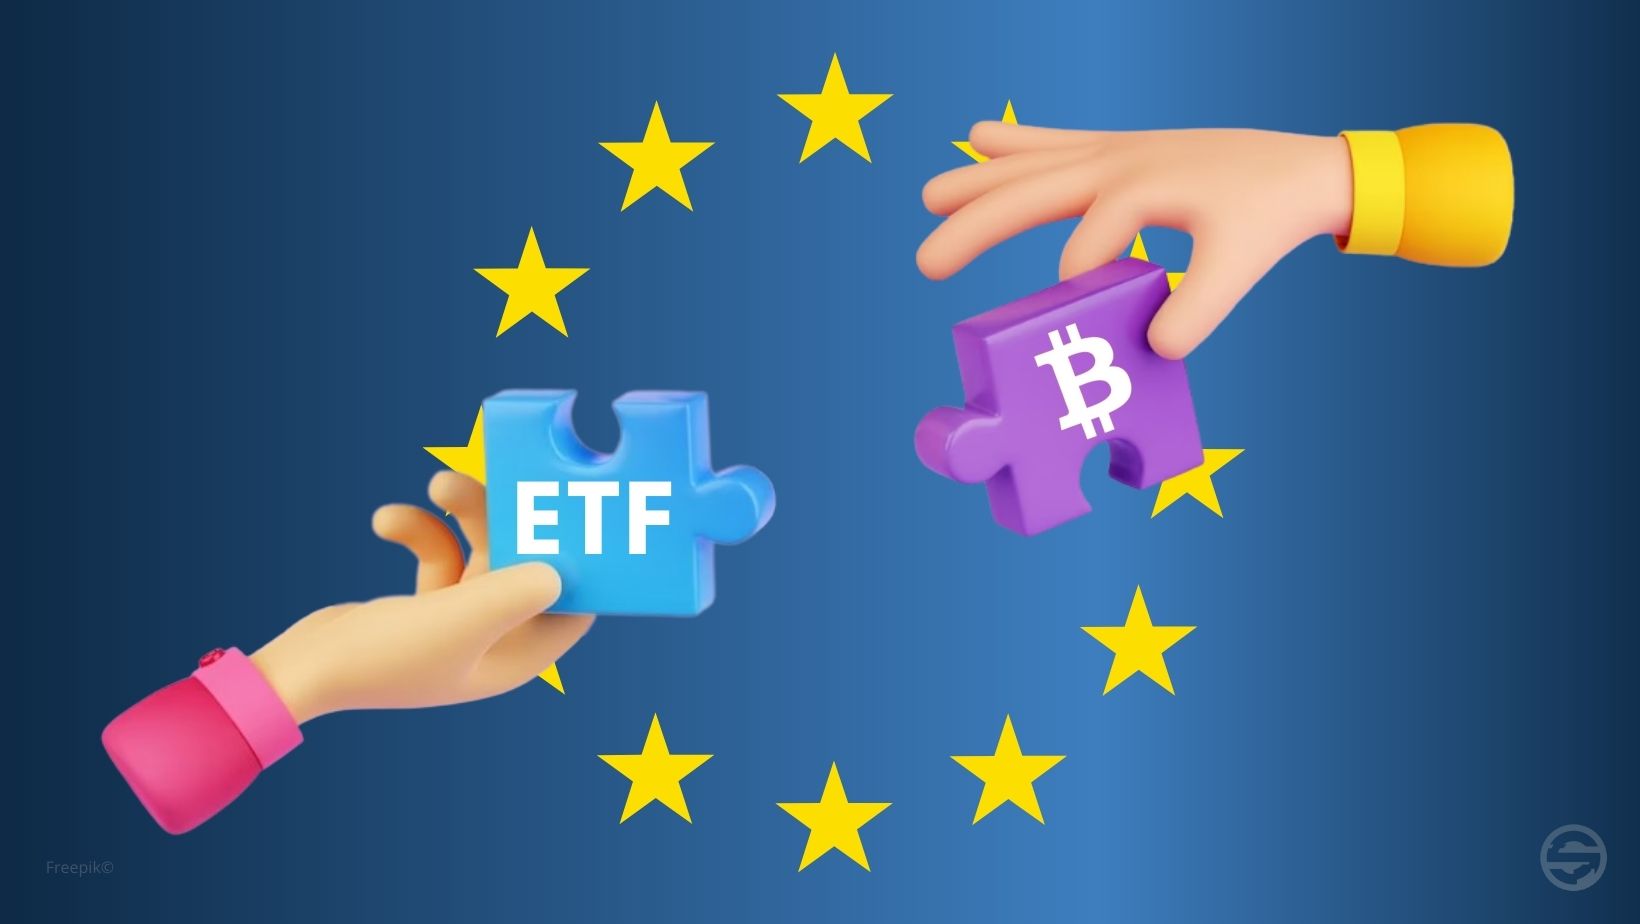 A Bitcoin Spot ETF in Europe: one step closer to institutional adoption